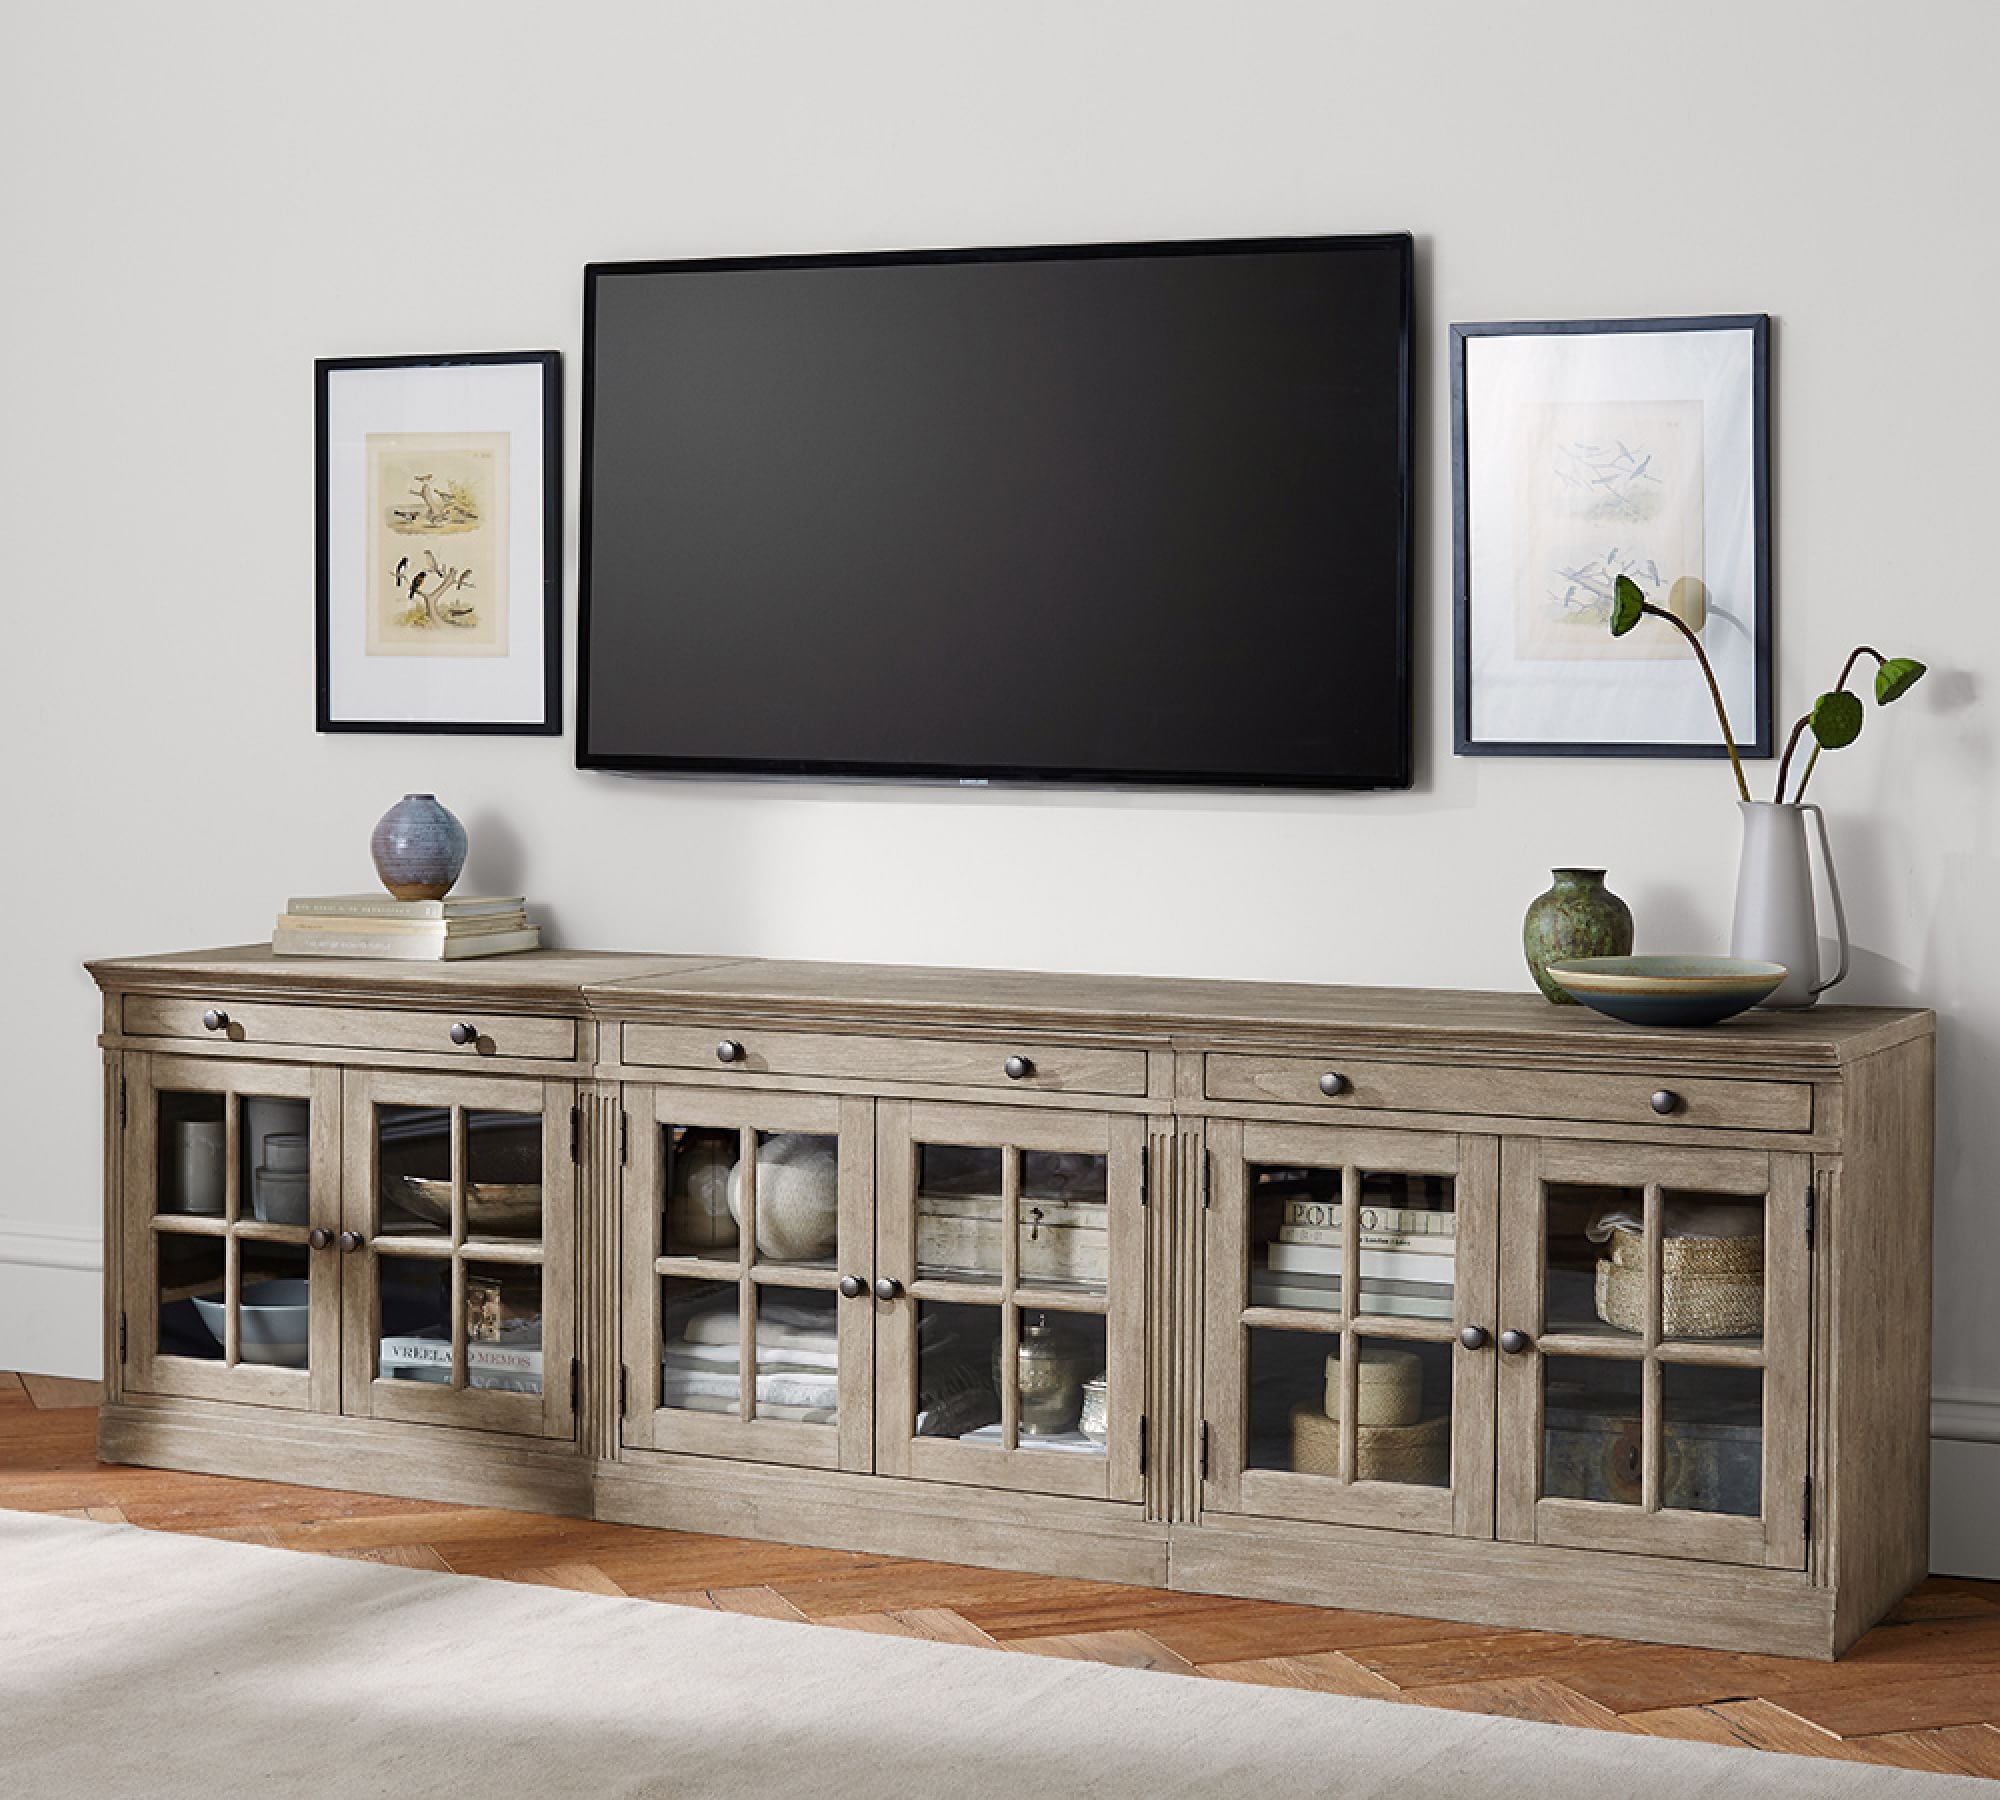 Livingston 105" Media Console with Glass Door Cabinets, Gray Wash - Image 1